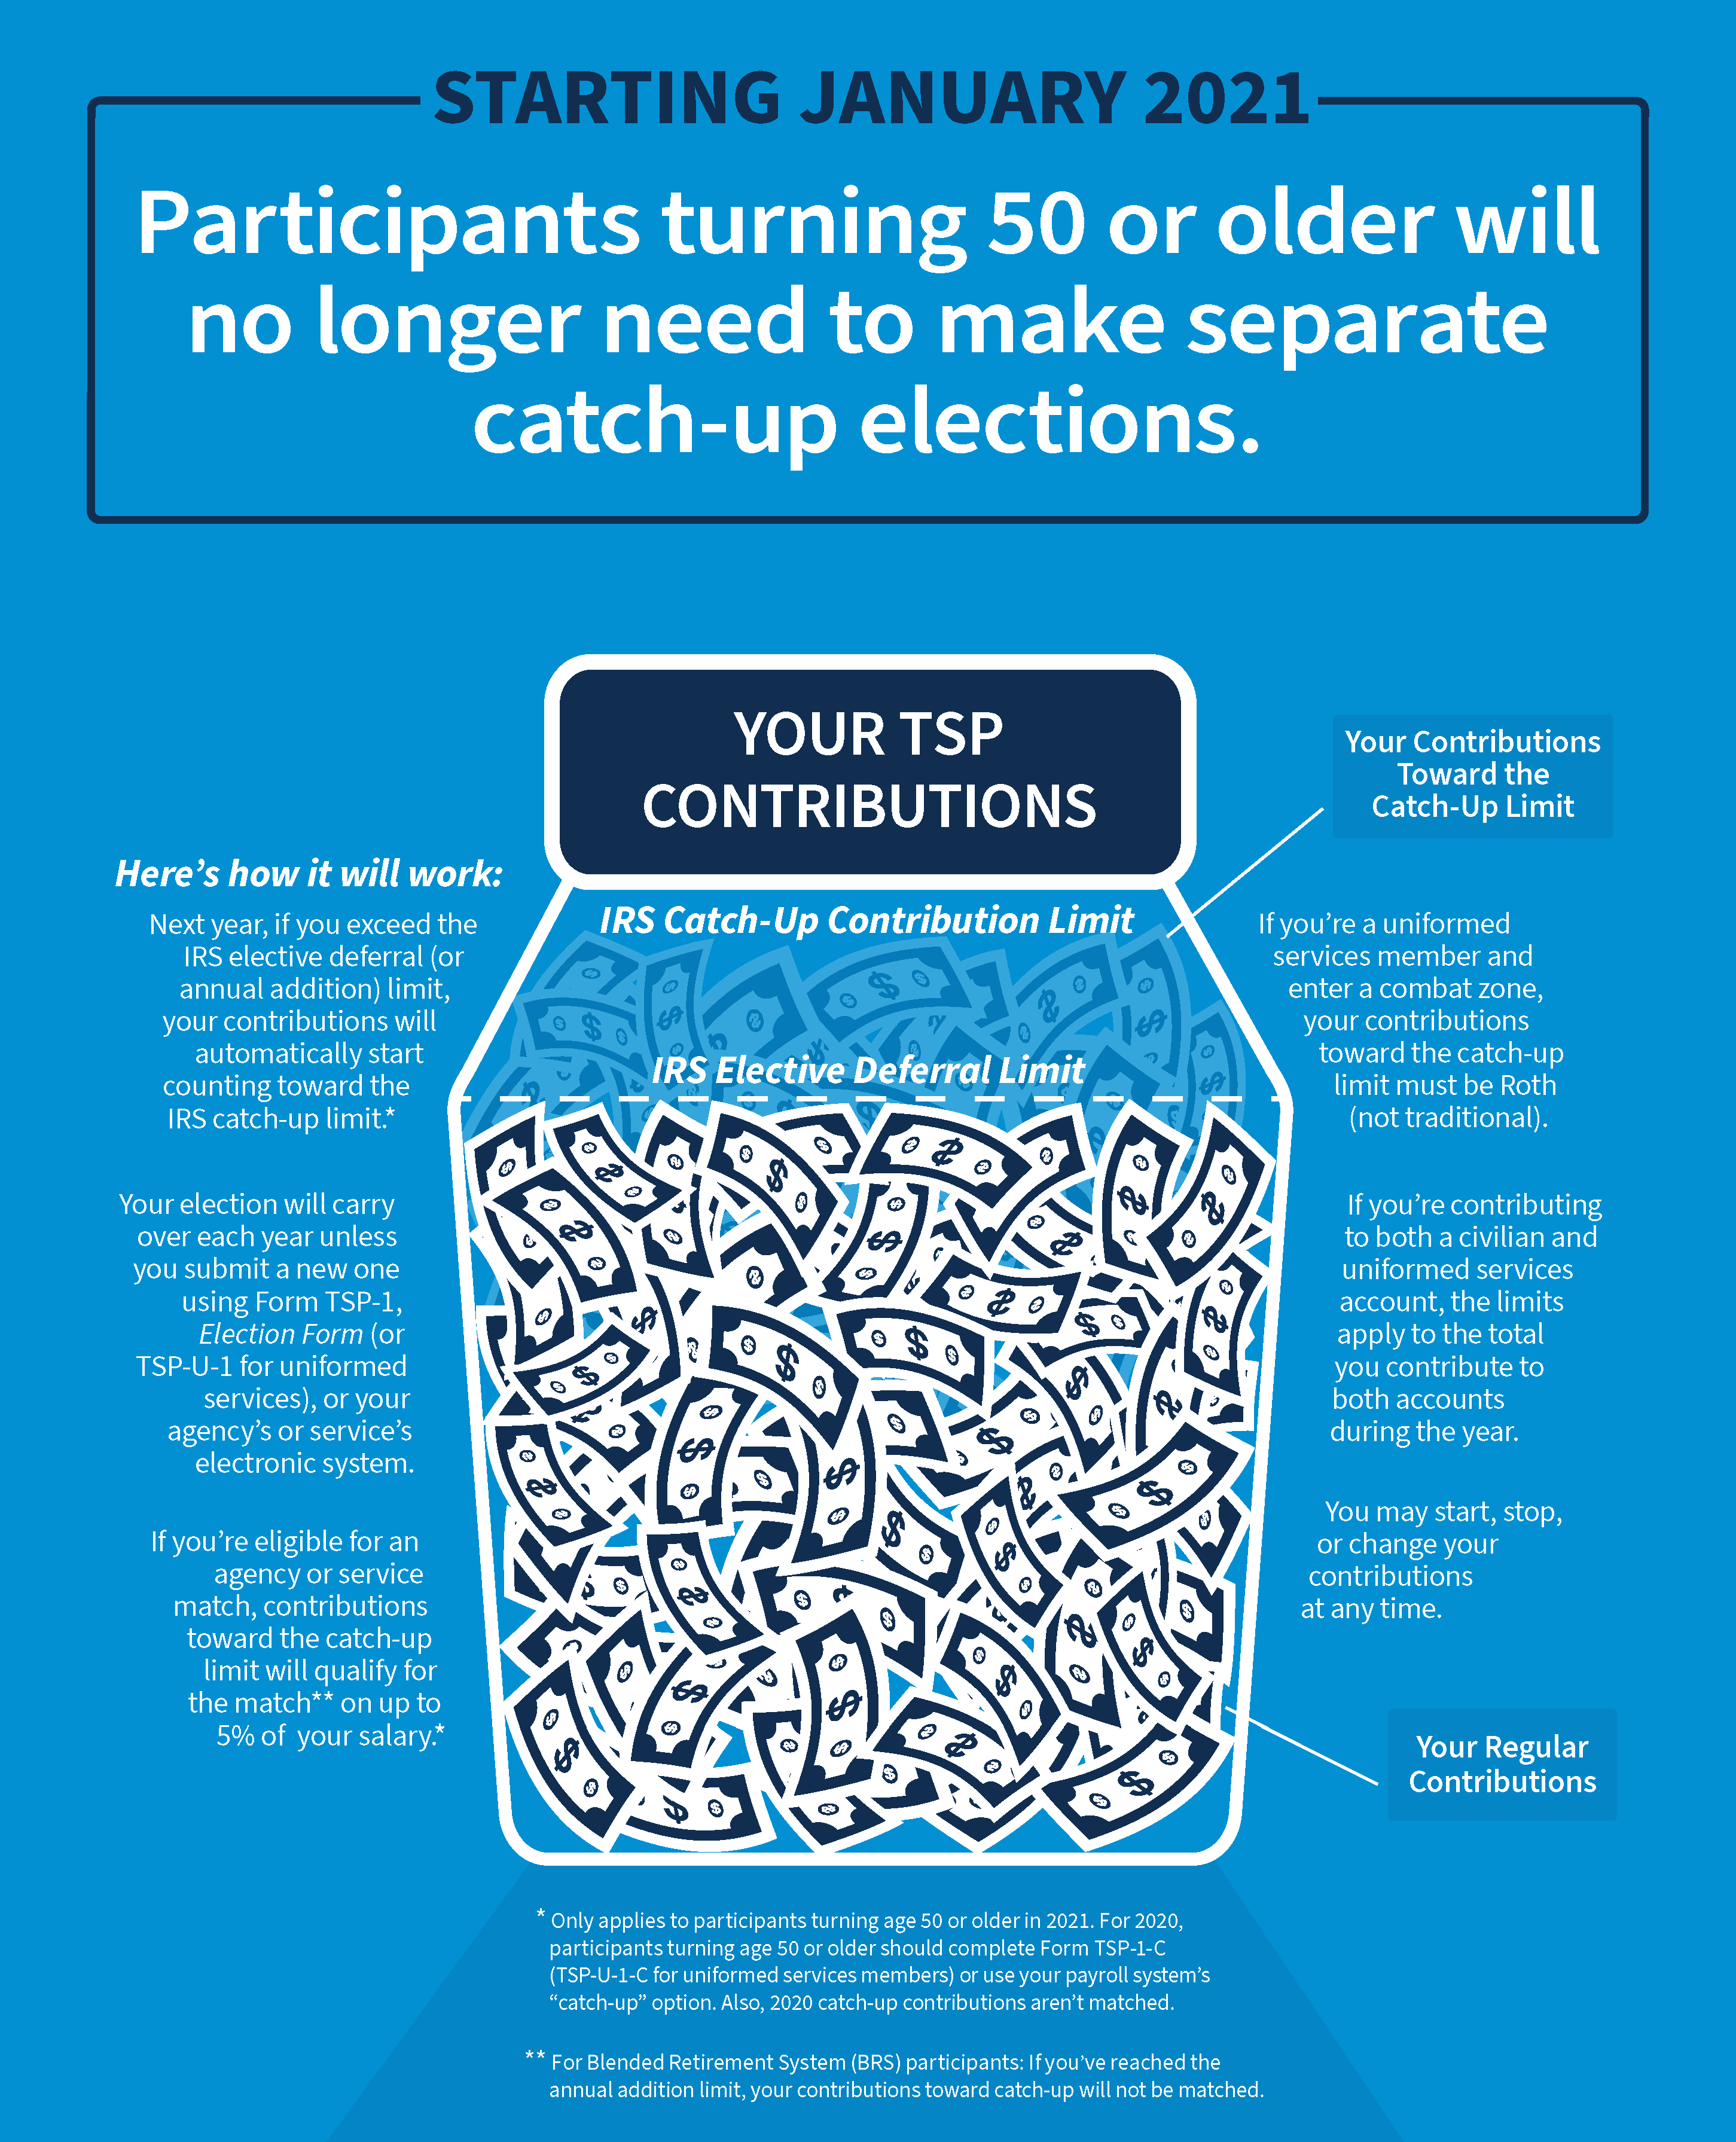 This infographic provides an overview of the changes coming to catch-up contributions. Feel free to share it with other TSP participants.